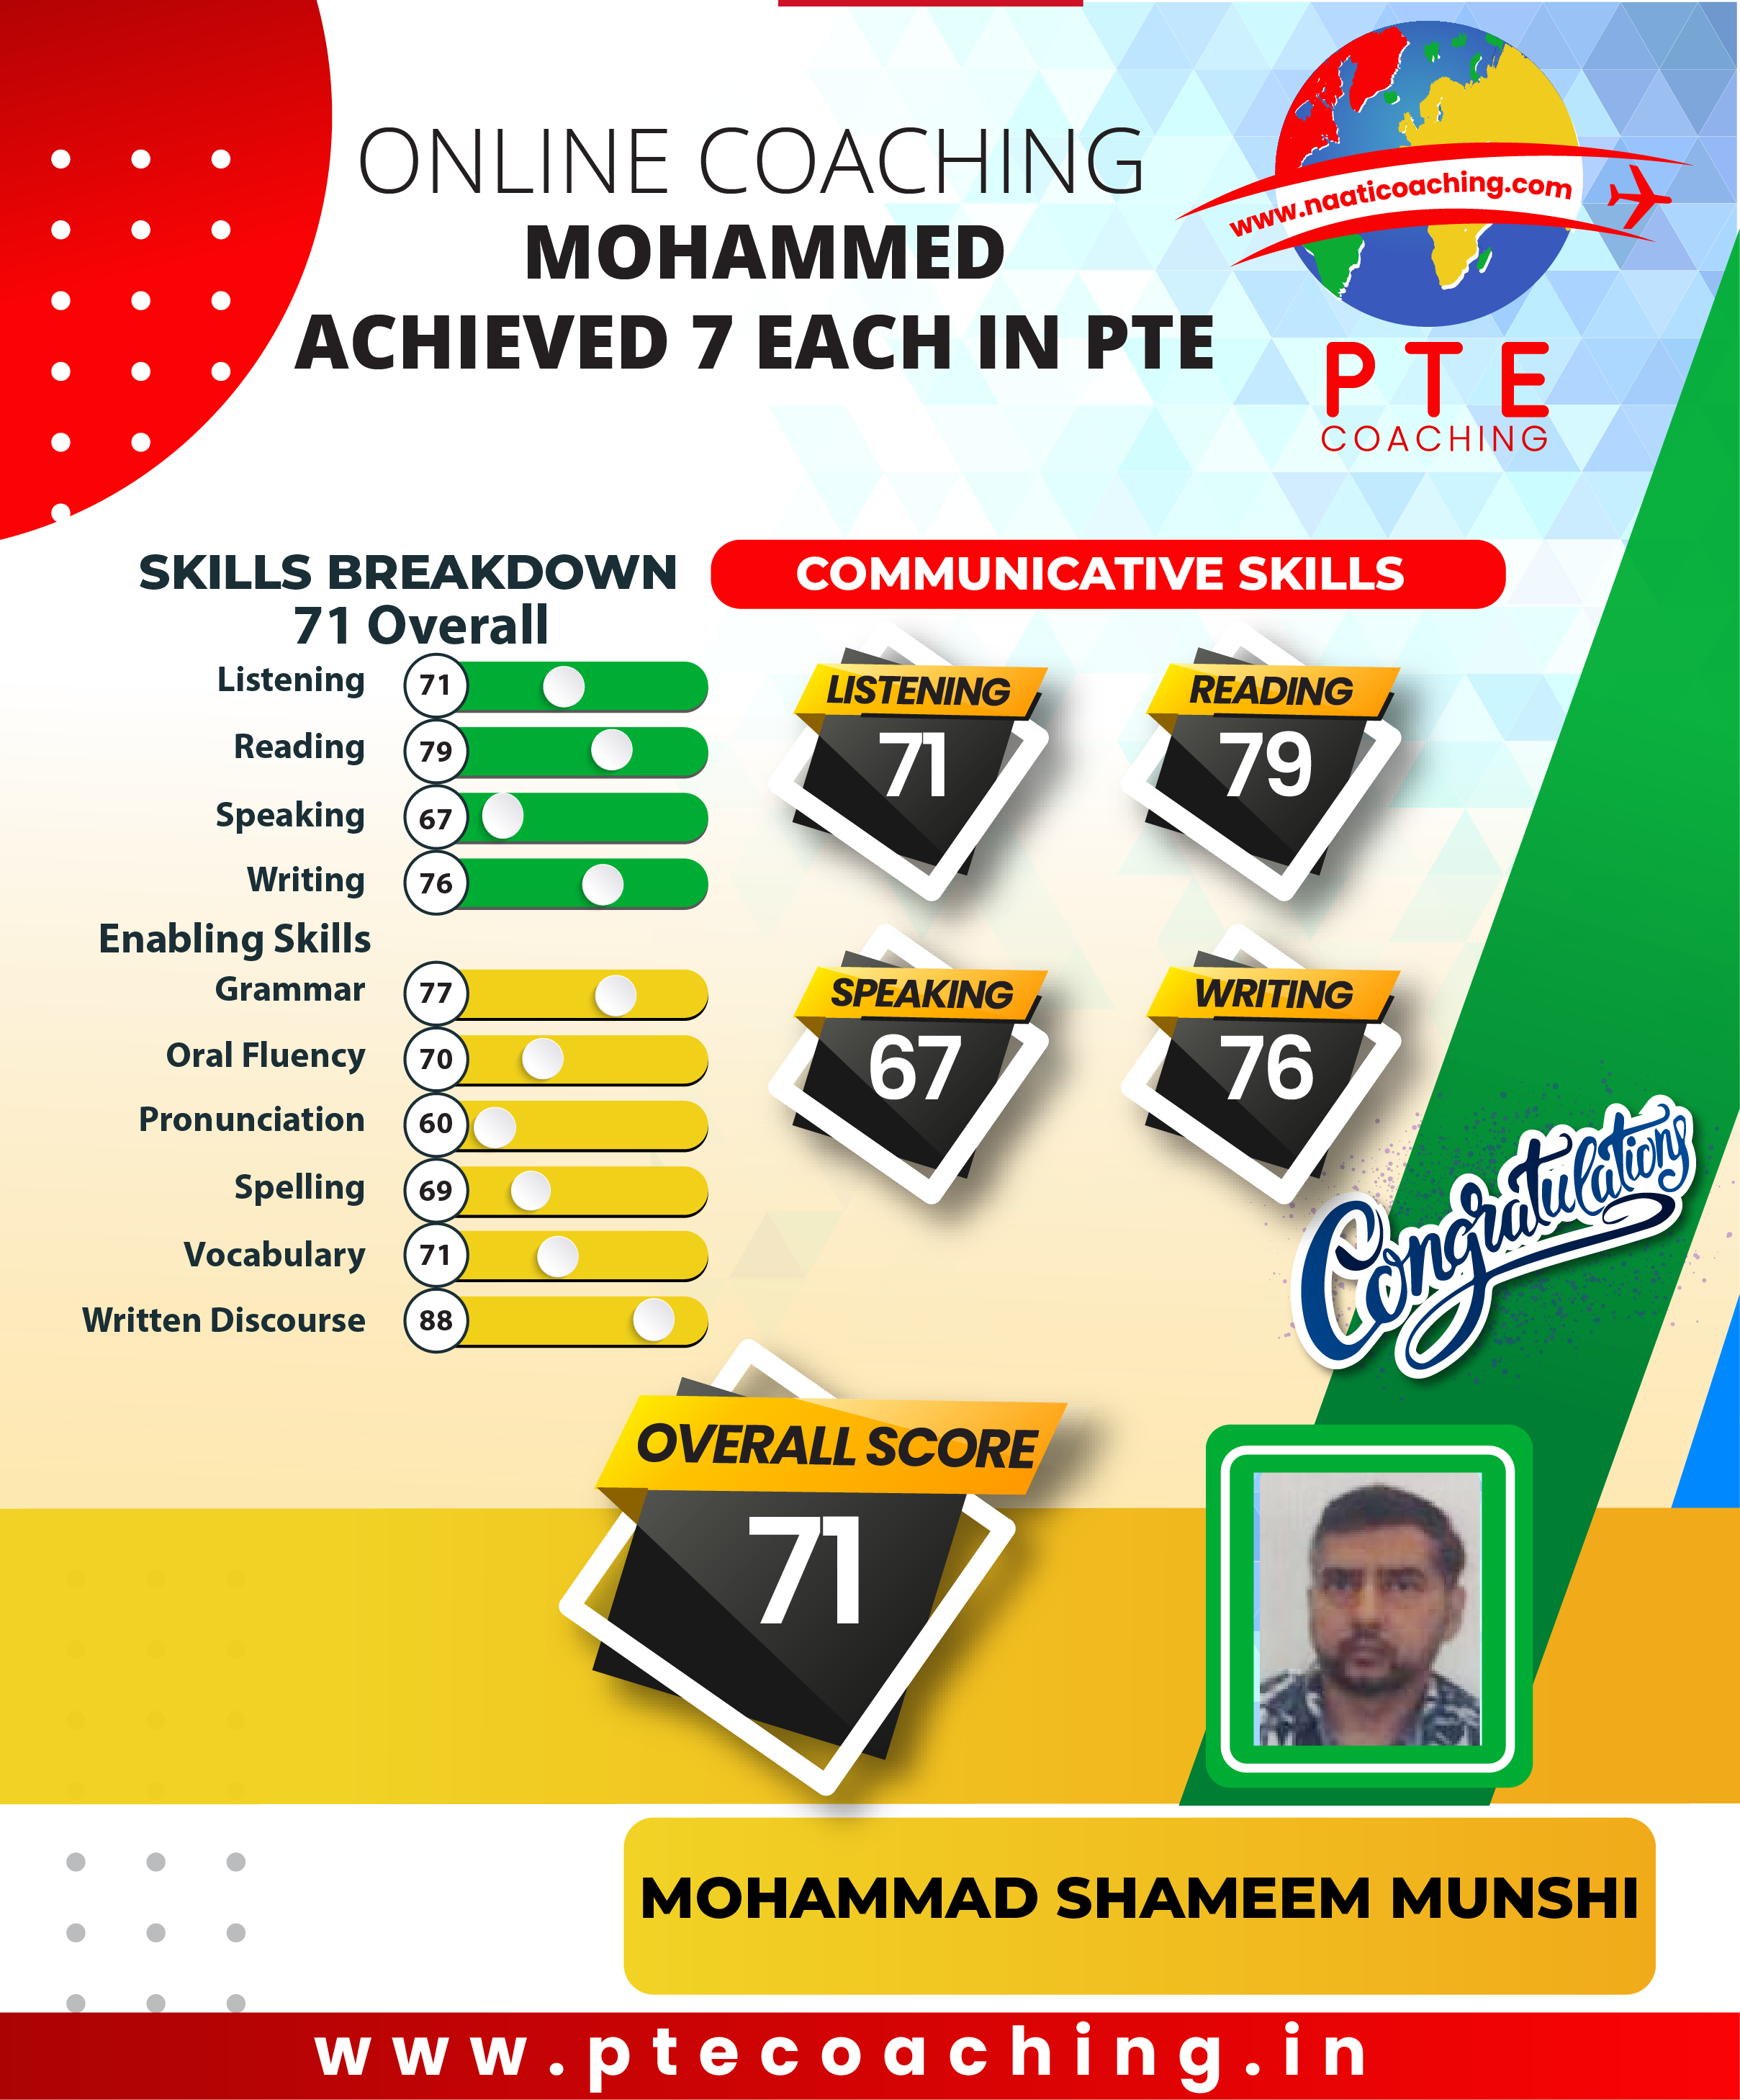 PTE Coaching Scorecard - Mohammed achieved 7 each in PTE